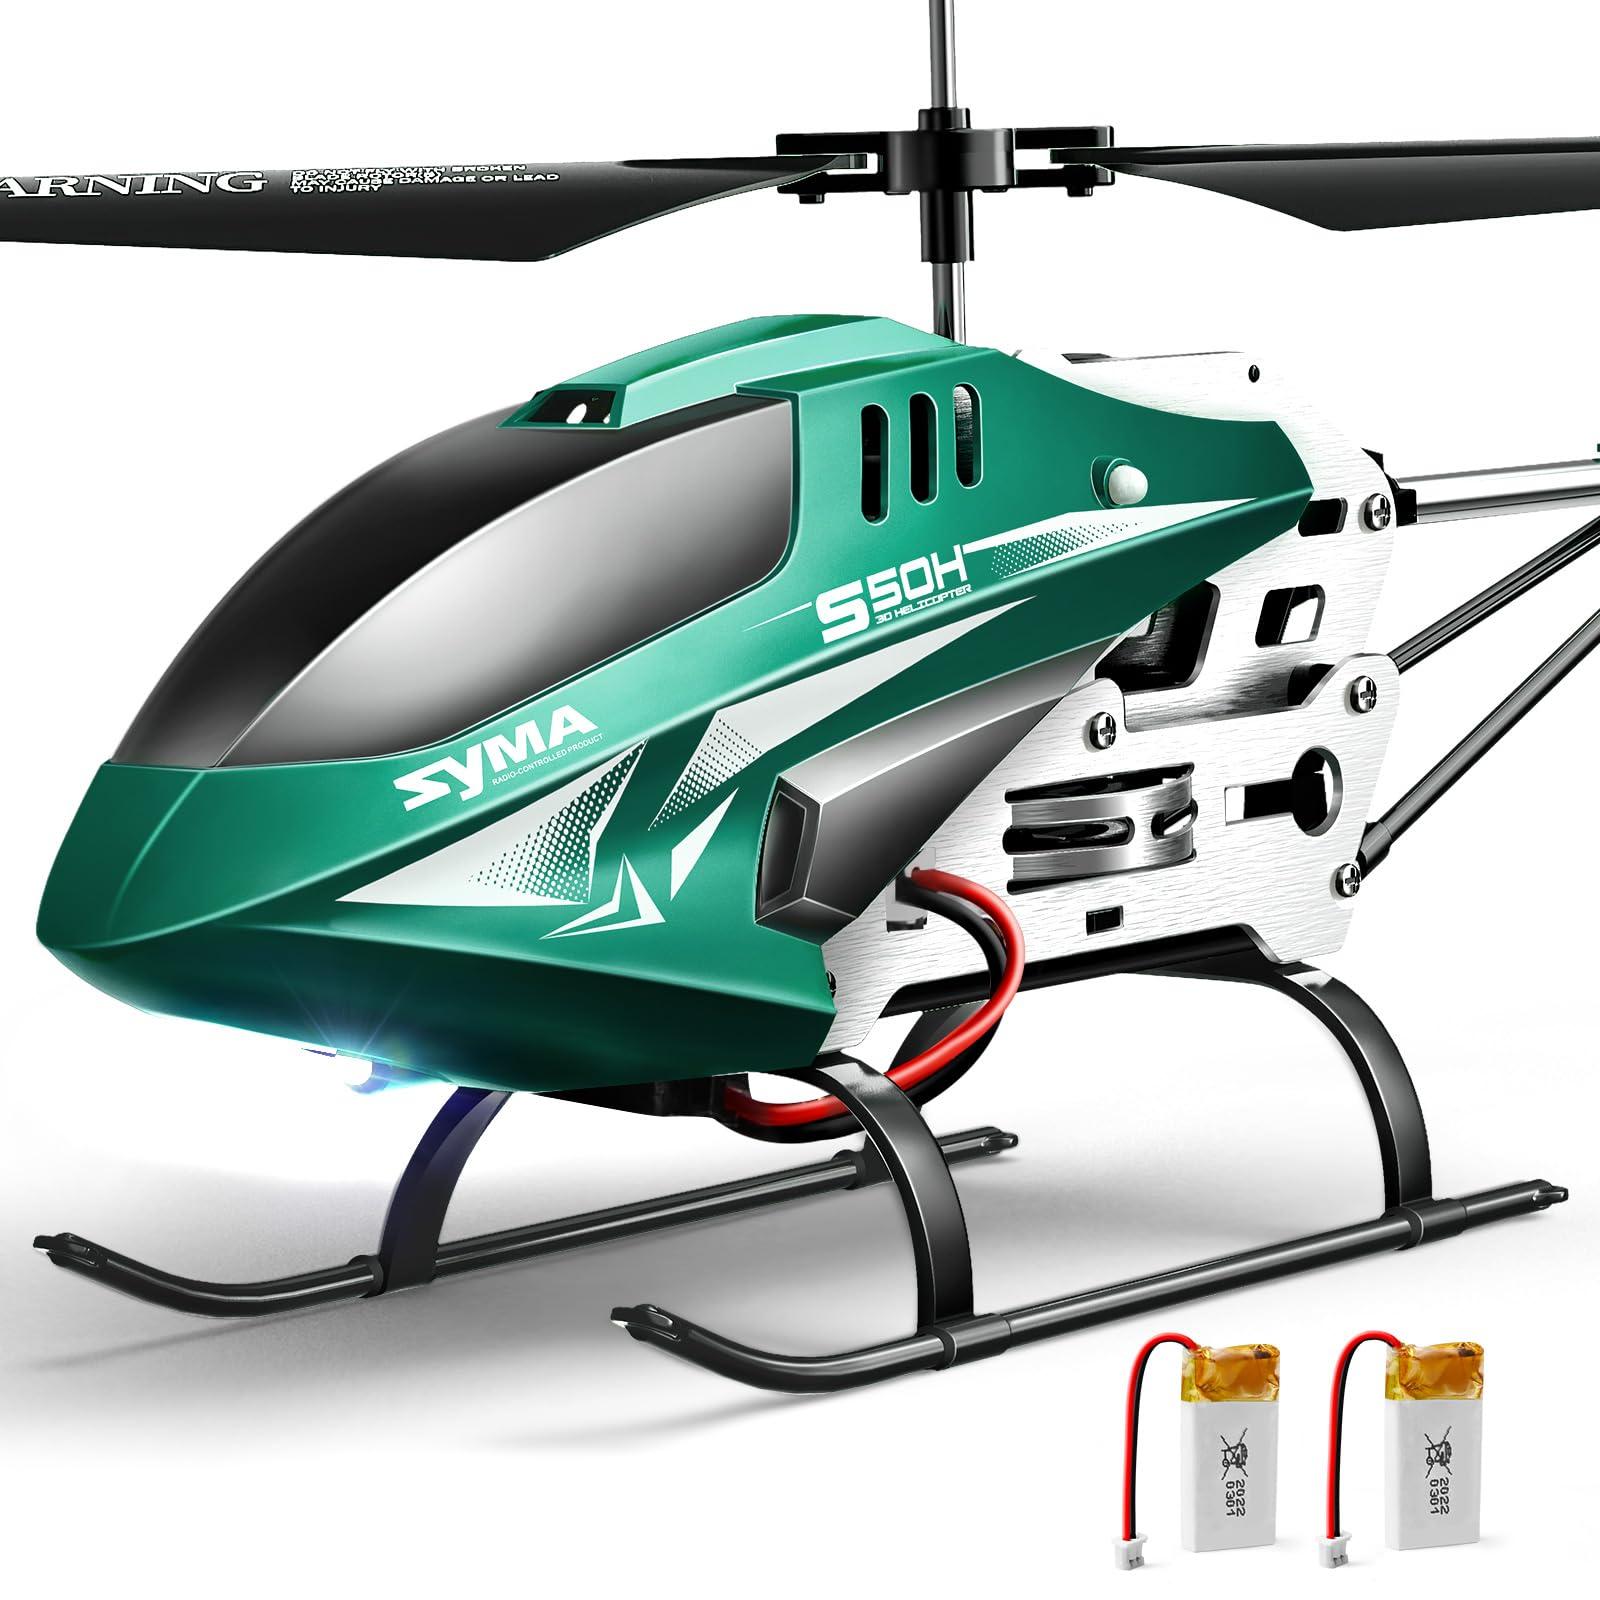 Syma Q9: Key Features of the Syma Q9 for RC Helicopter Enthusiasts